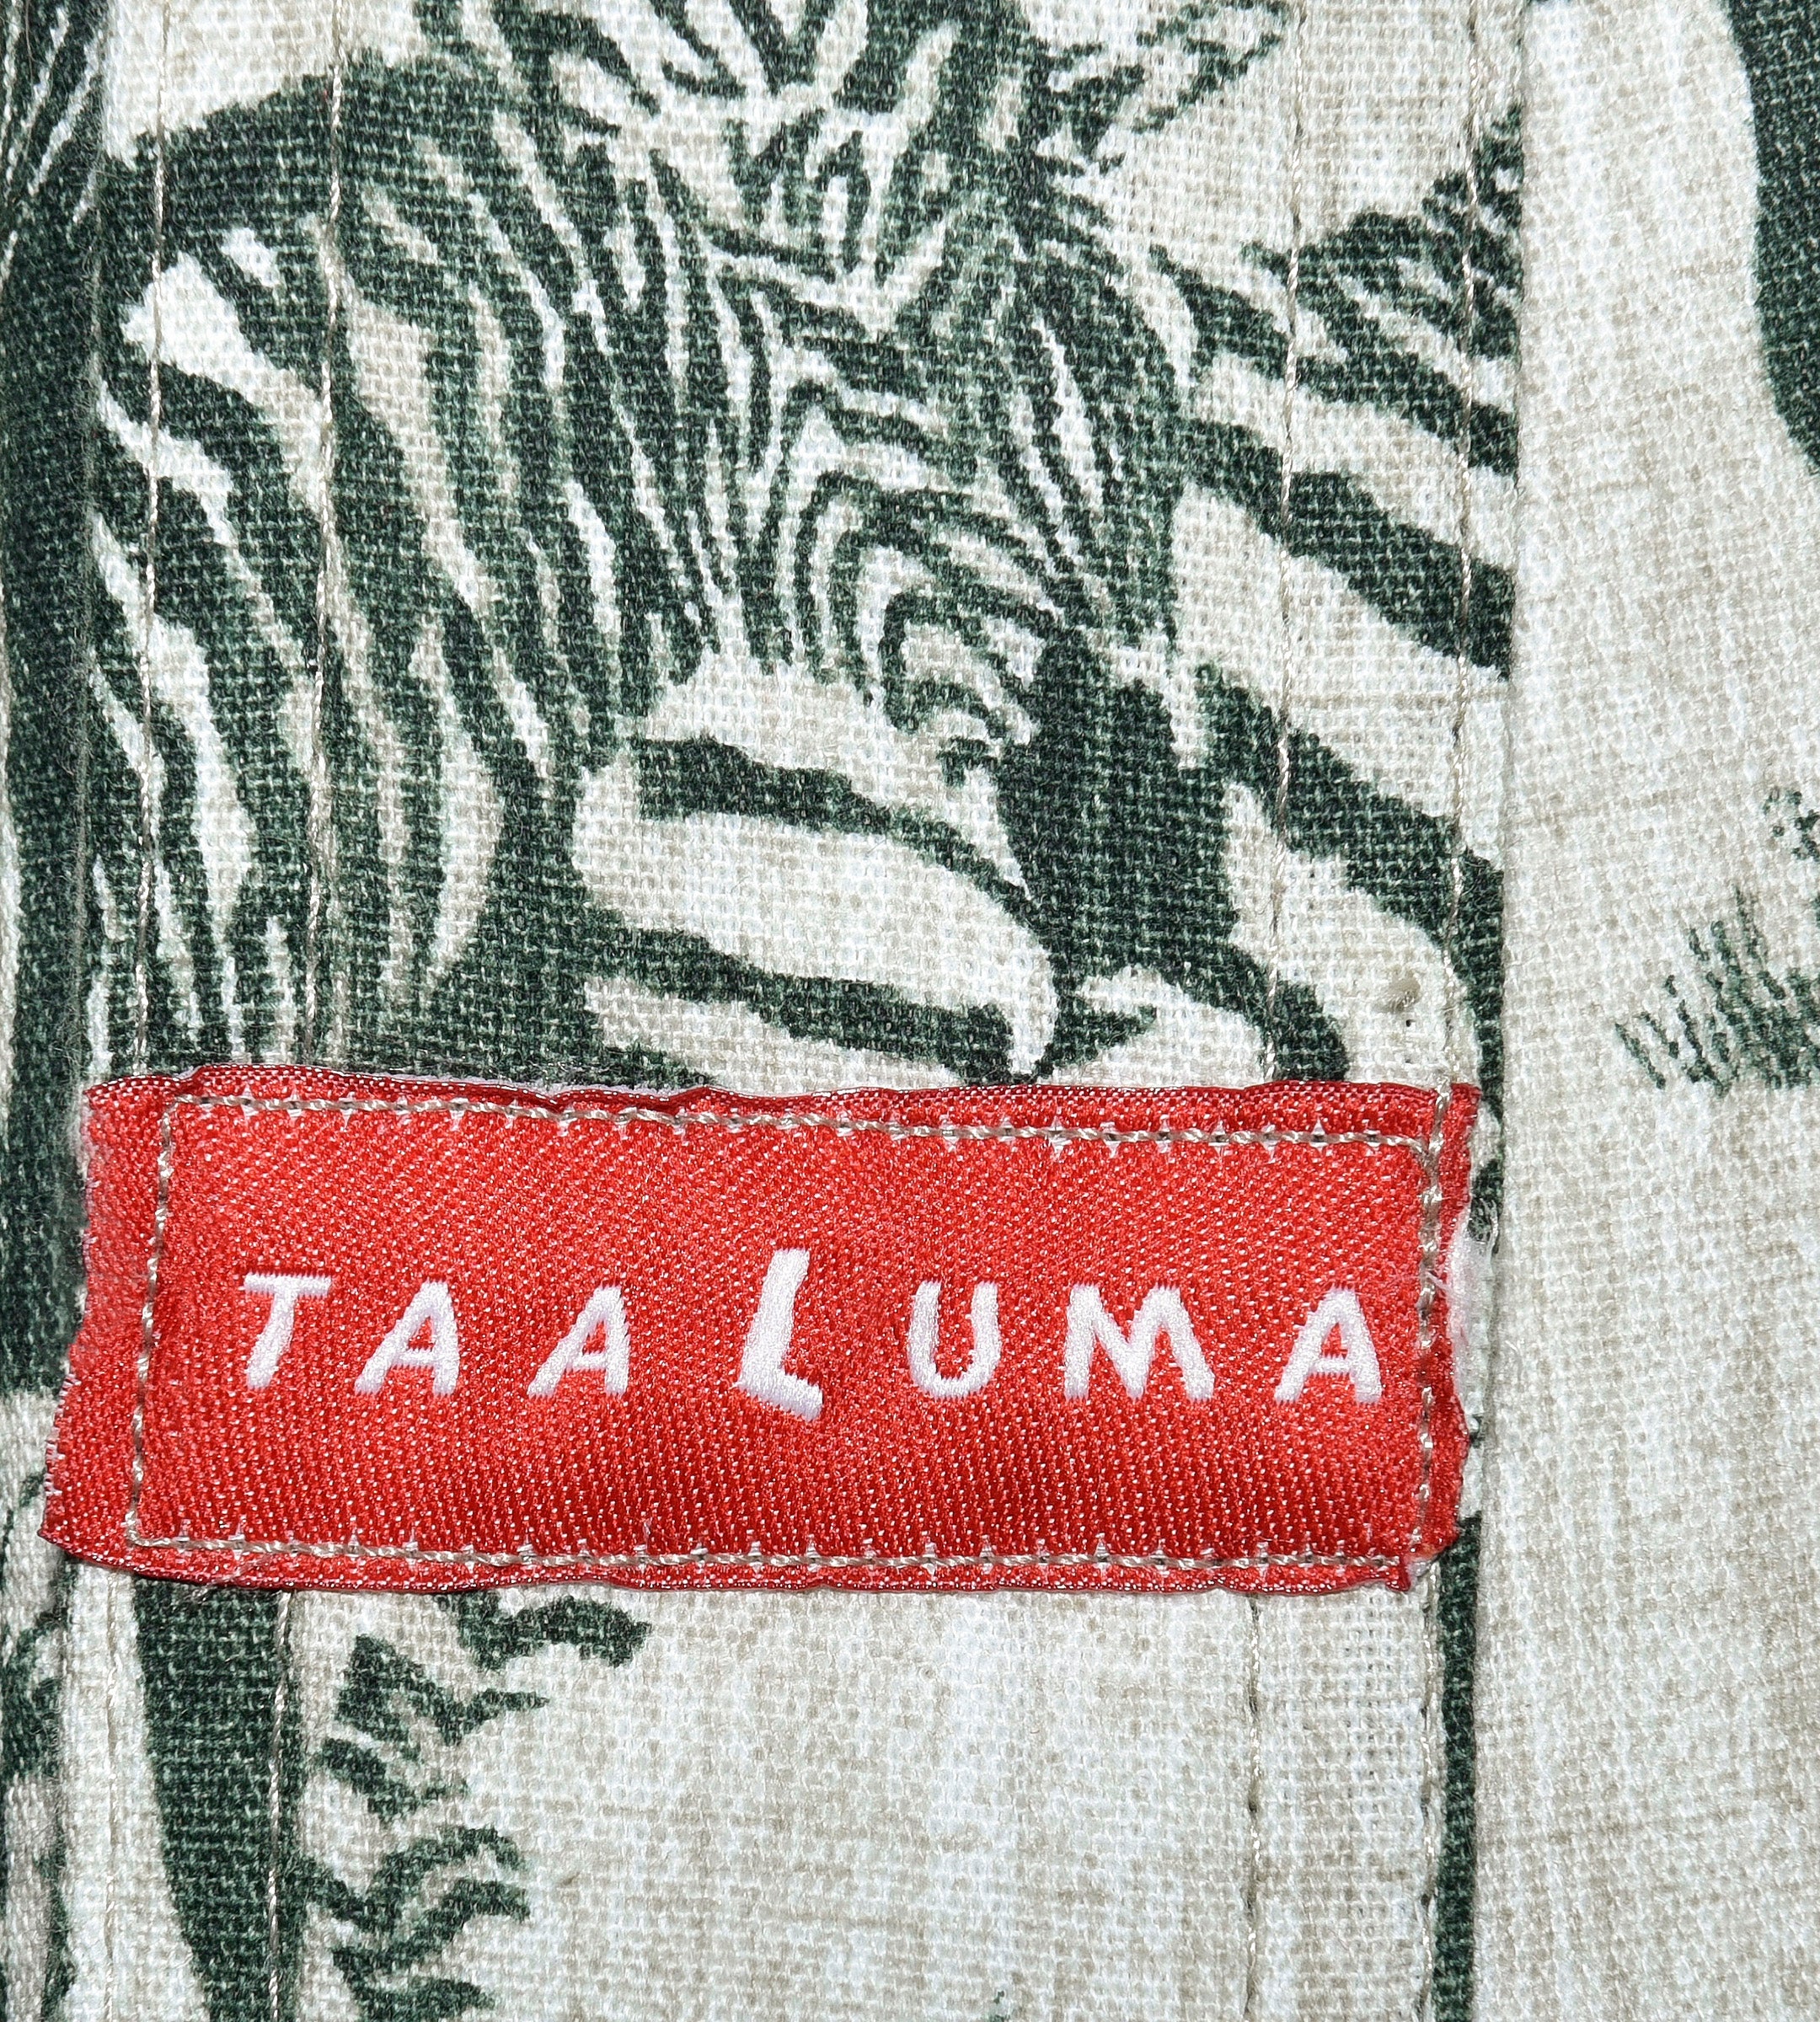 Zambia Tote (by Tracy Murray)